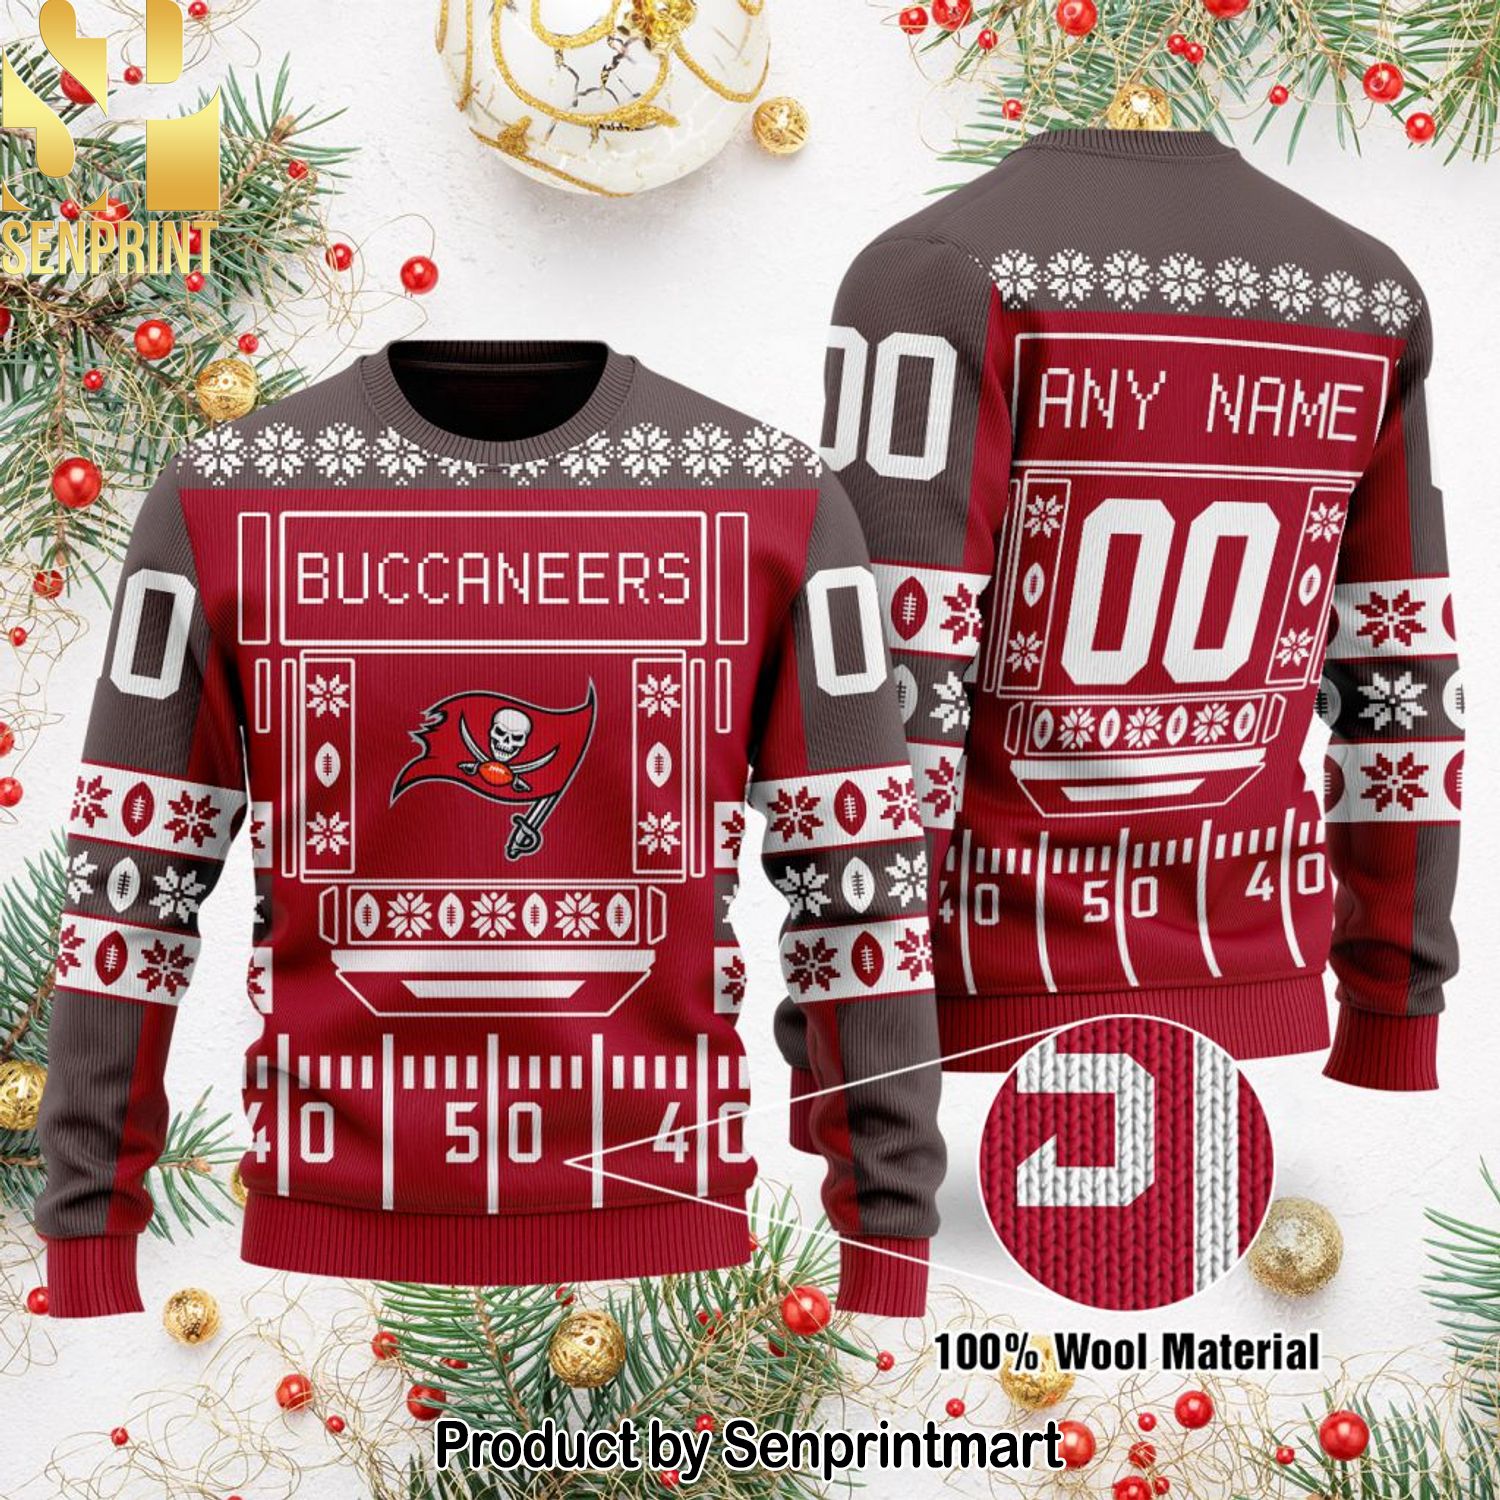 Tampa Bay Buccaneers NFL Ugly Christmas Holiday Sweater